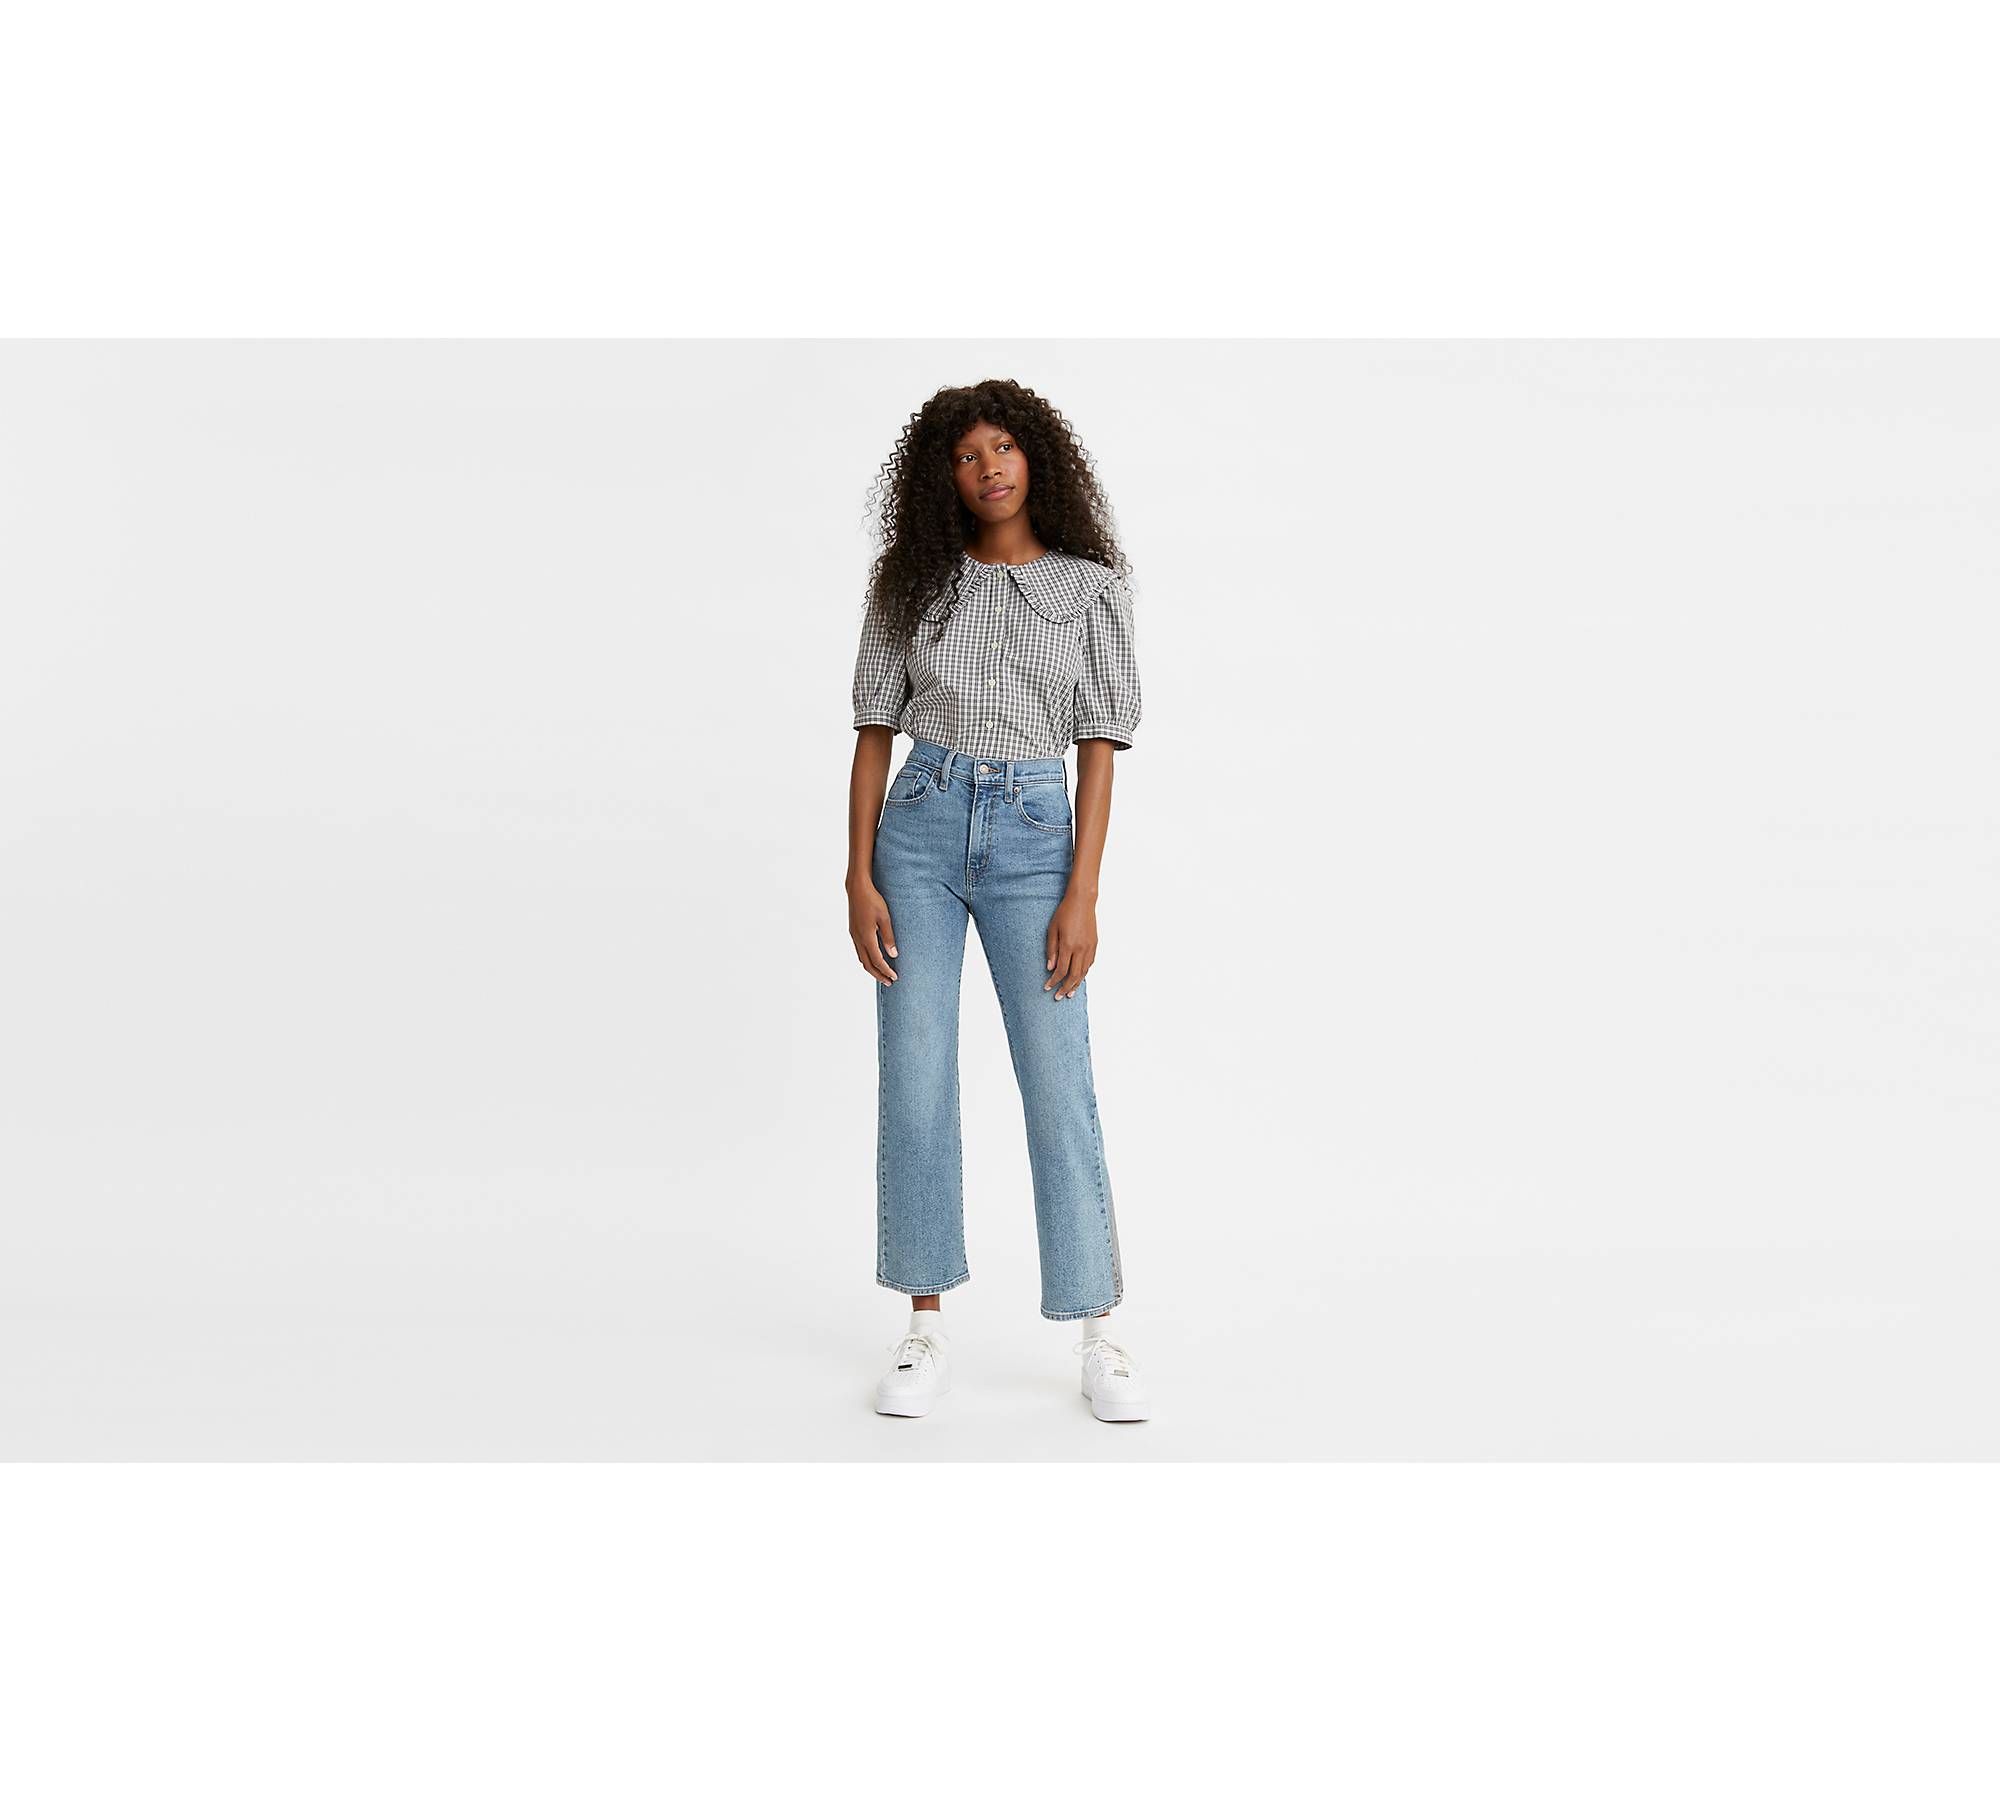 Women's High Rise Cropped Jeans